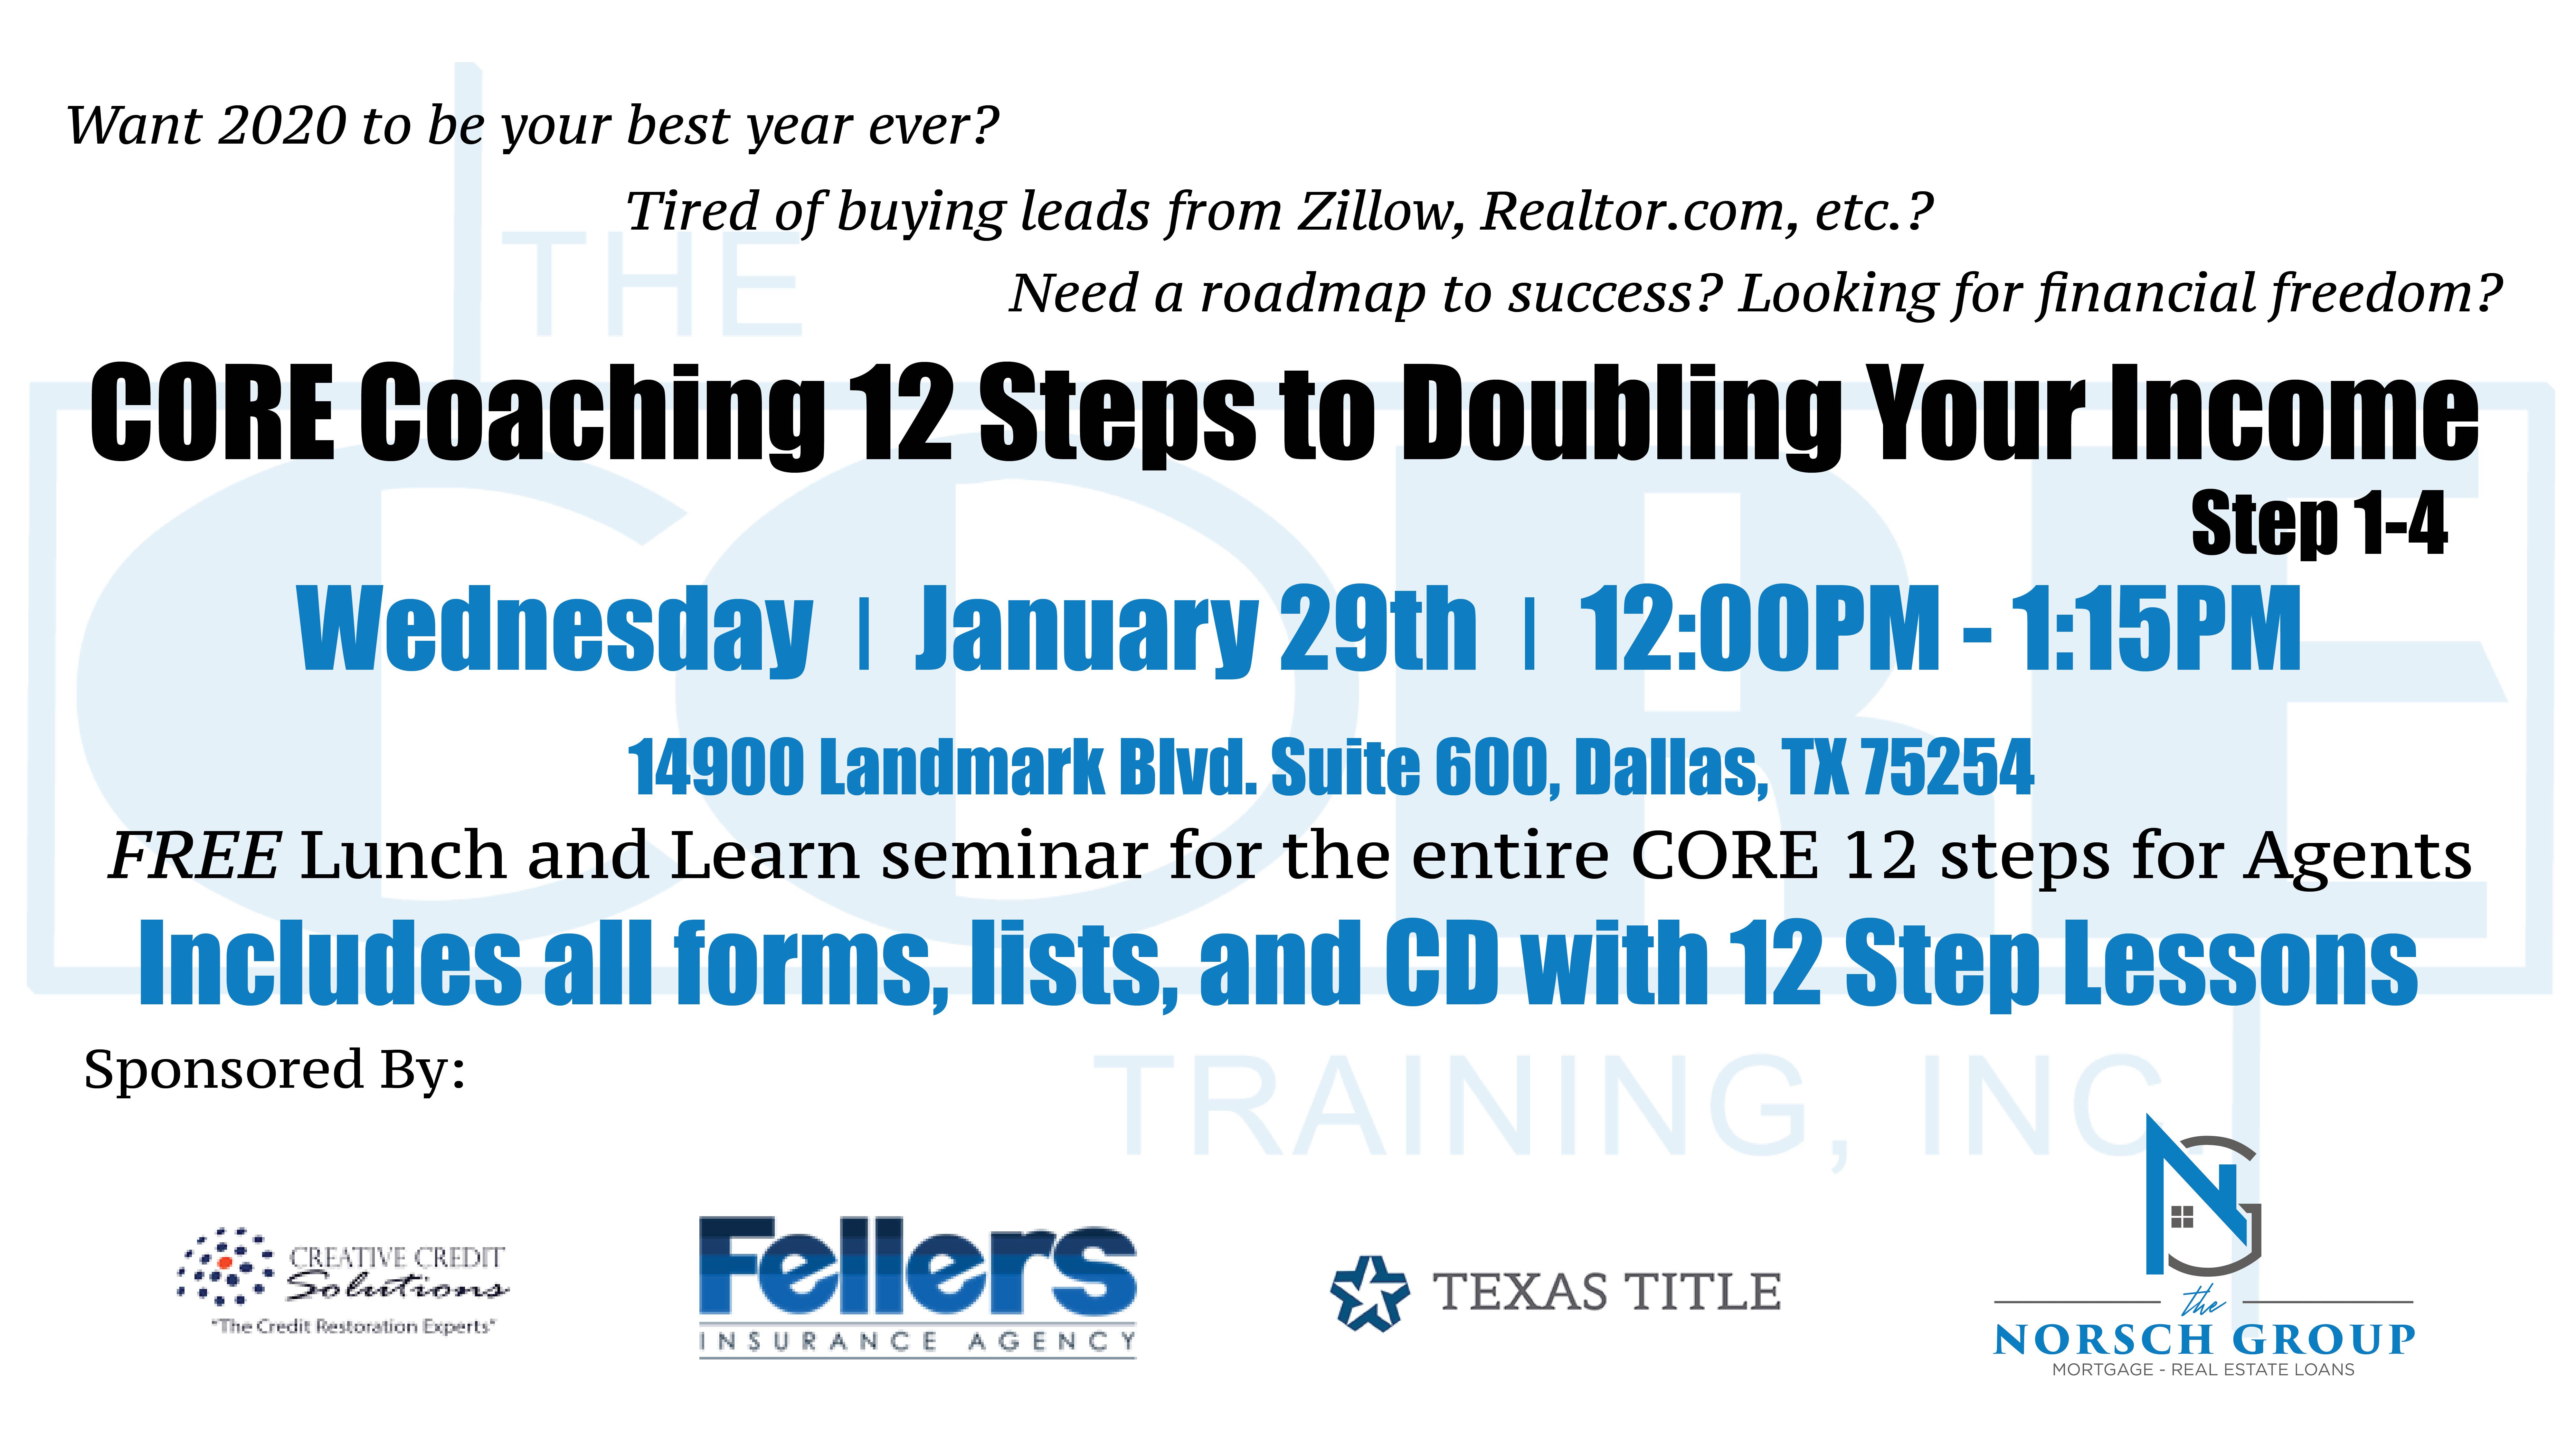 CE Course - CORE Coaching 12 Steps to Doubling Your Income: Steps 1-4